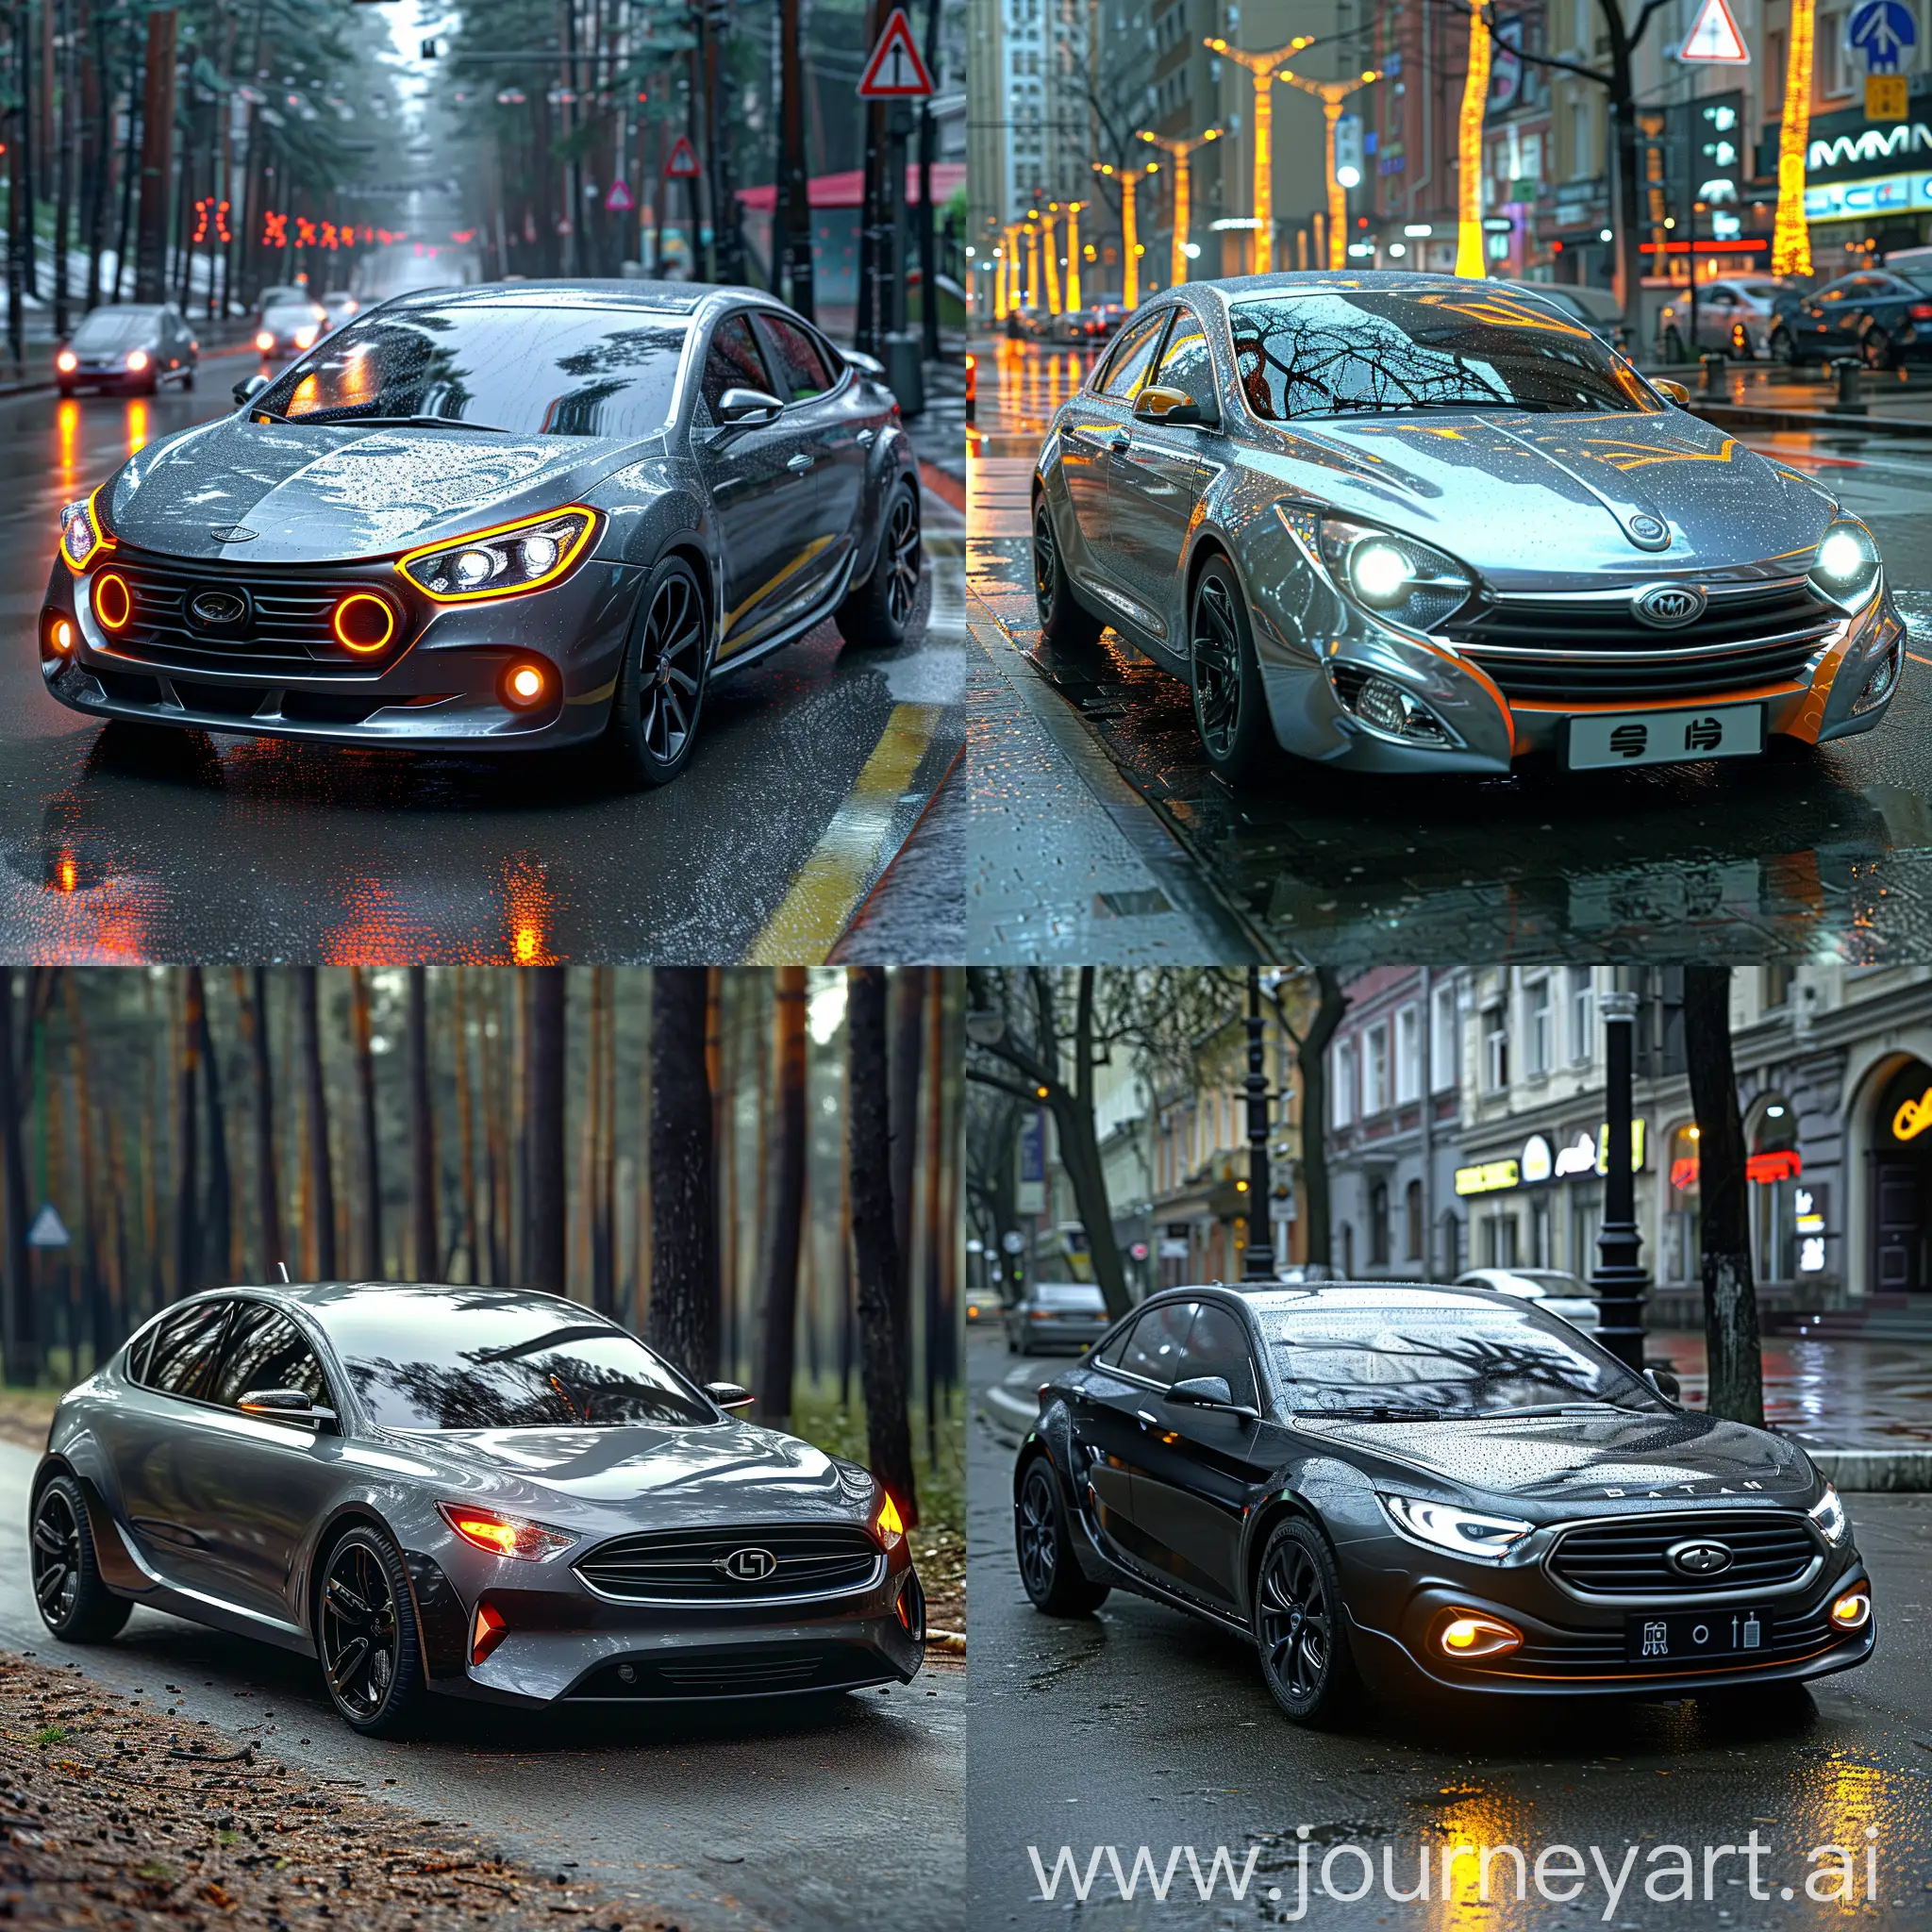 Futuristic LADA Vesta https://upload.wikimedia.org/wikipedia/commons/thumb/8/85/Lada_Vesta_%28cropped%29.jpg/280px-Lada_Vesta_%28cropped%29.jpg:: Autonomous Driving: Ad, Augmented Reality Windshield, Biometric Sensors, Advanced Connectivity, AI Virtual Assistant, Gesture Control, Advanced Safety Features, Energy-Efficient Powertrain, Dynamic Exterior Lighting:: innovative futurism, octane render --stylize 1000